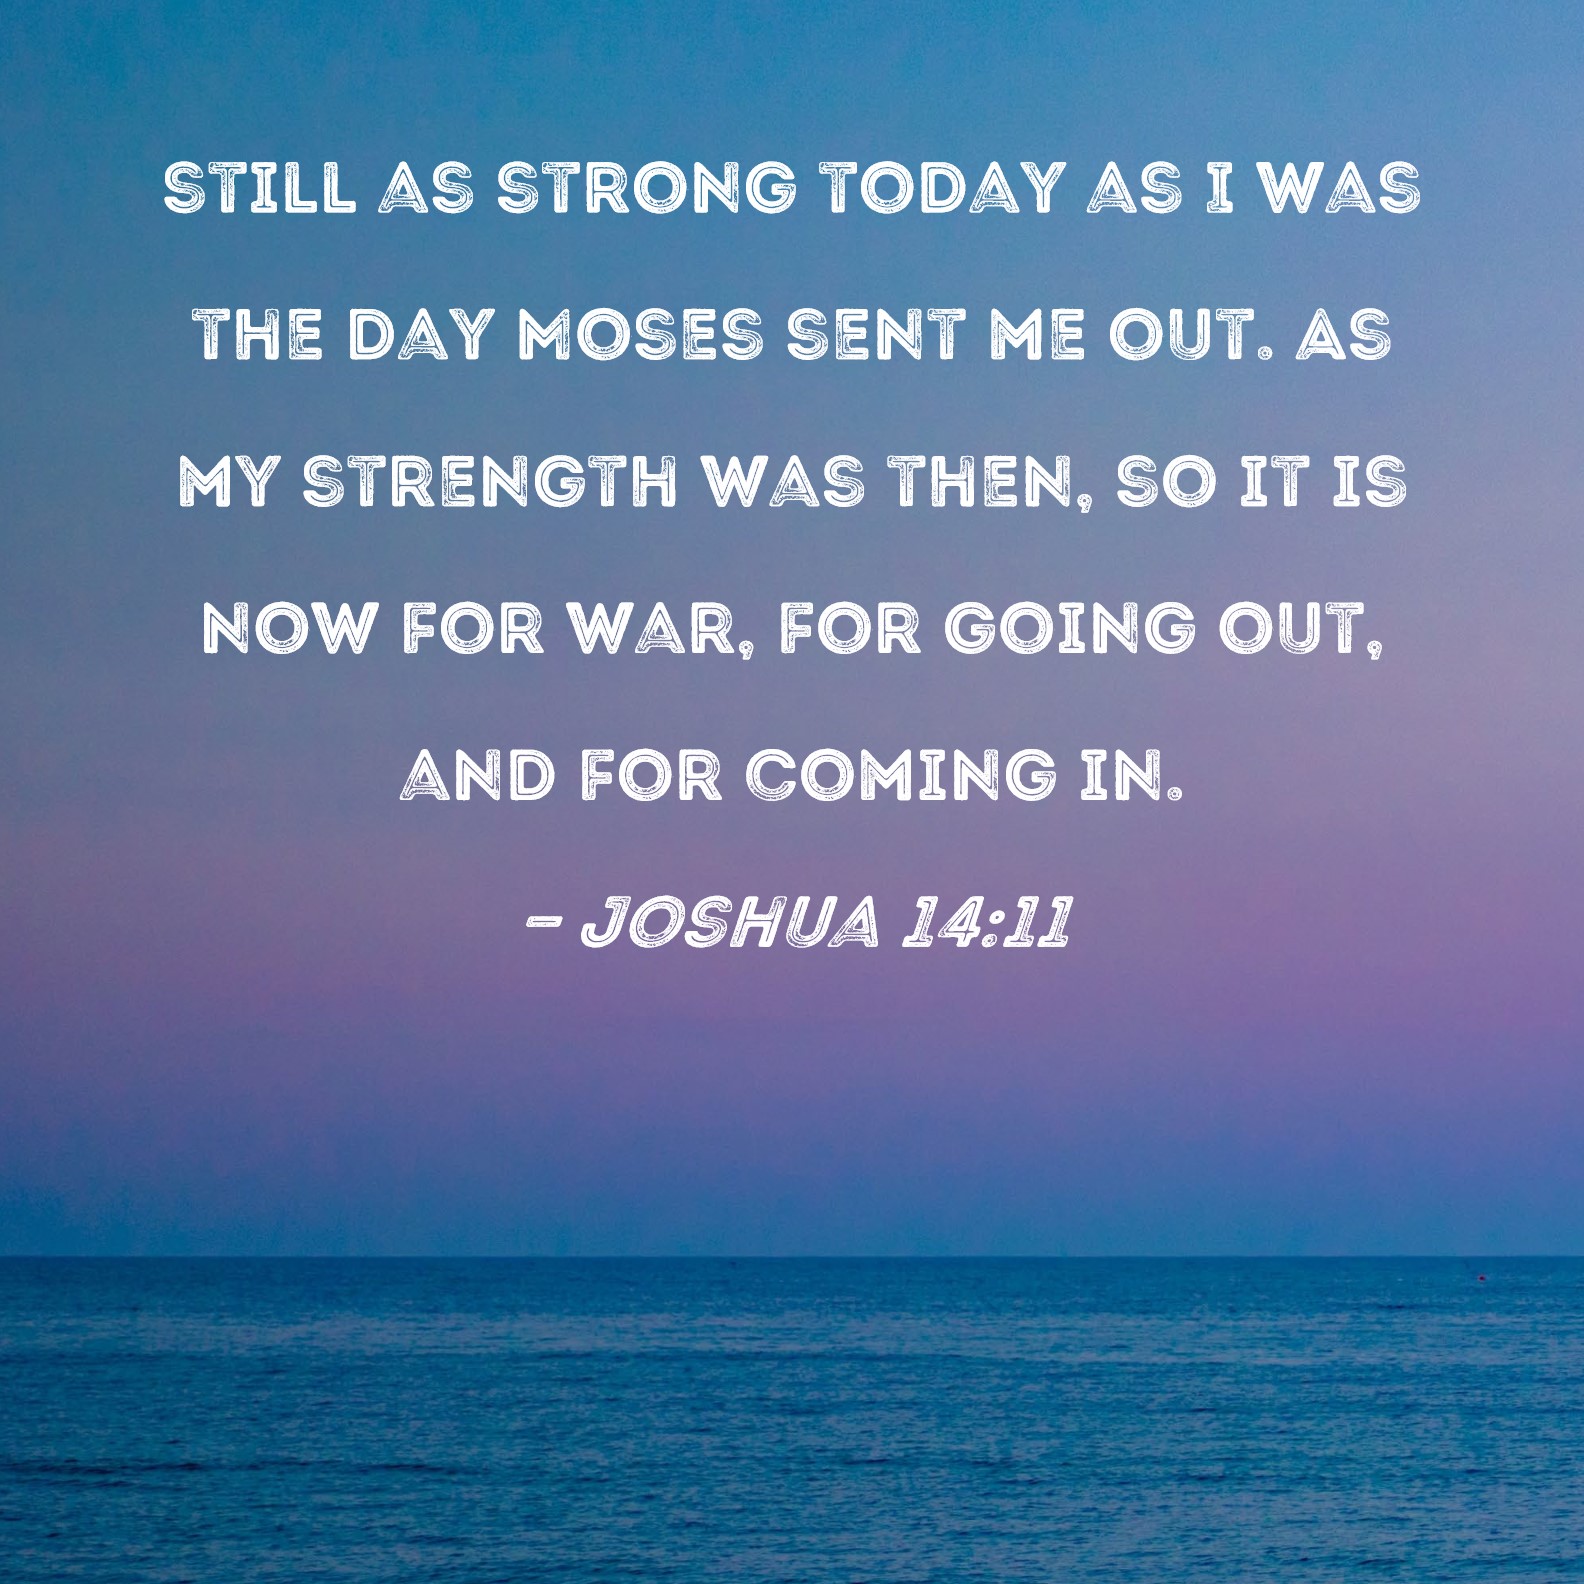 Joshua 14:11 still as strong today as I was the day Moses sent me